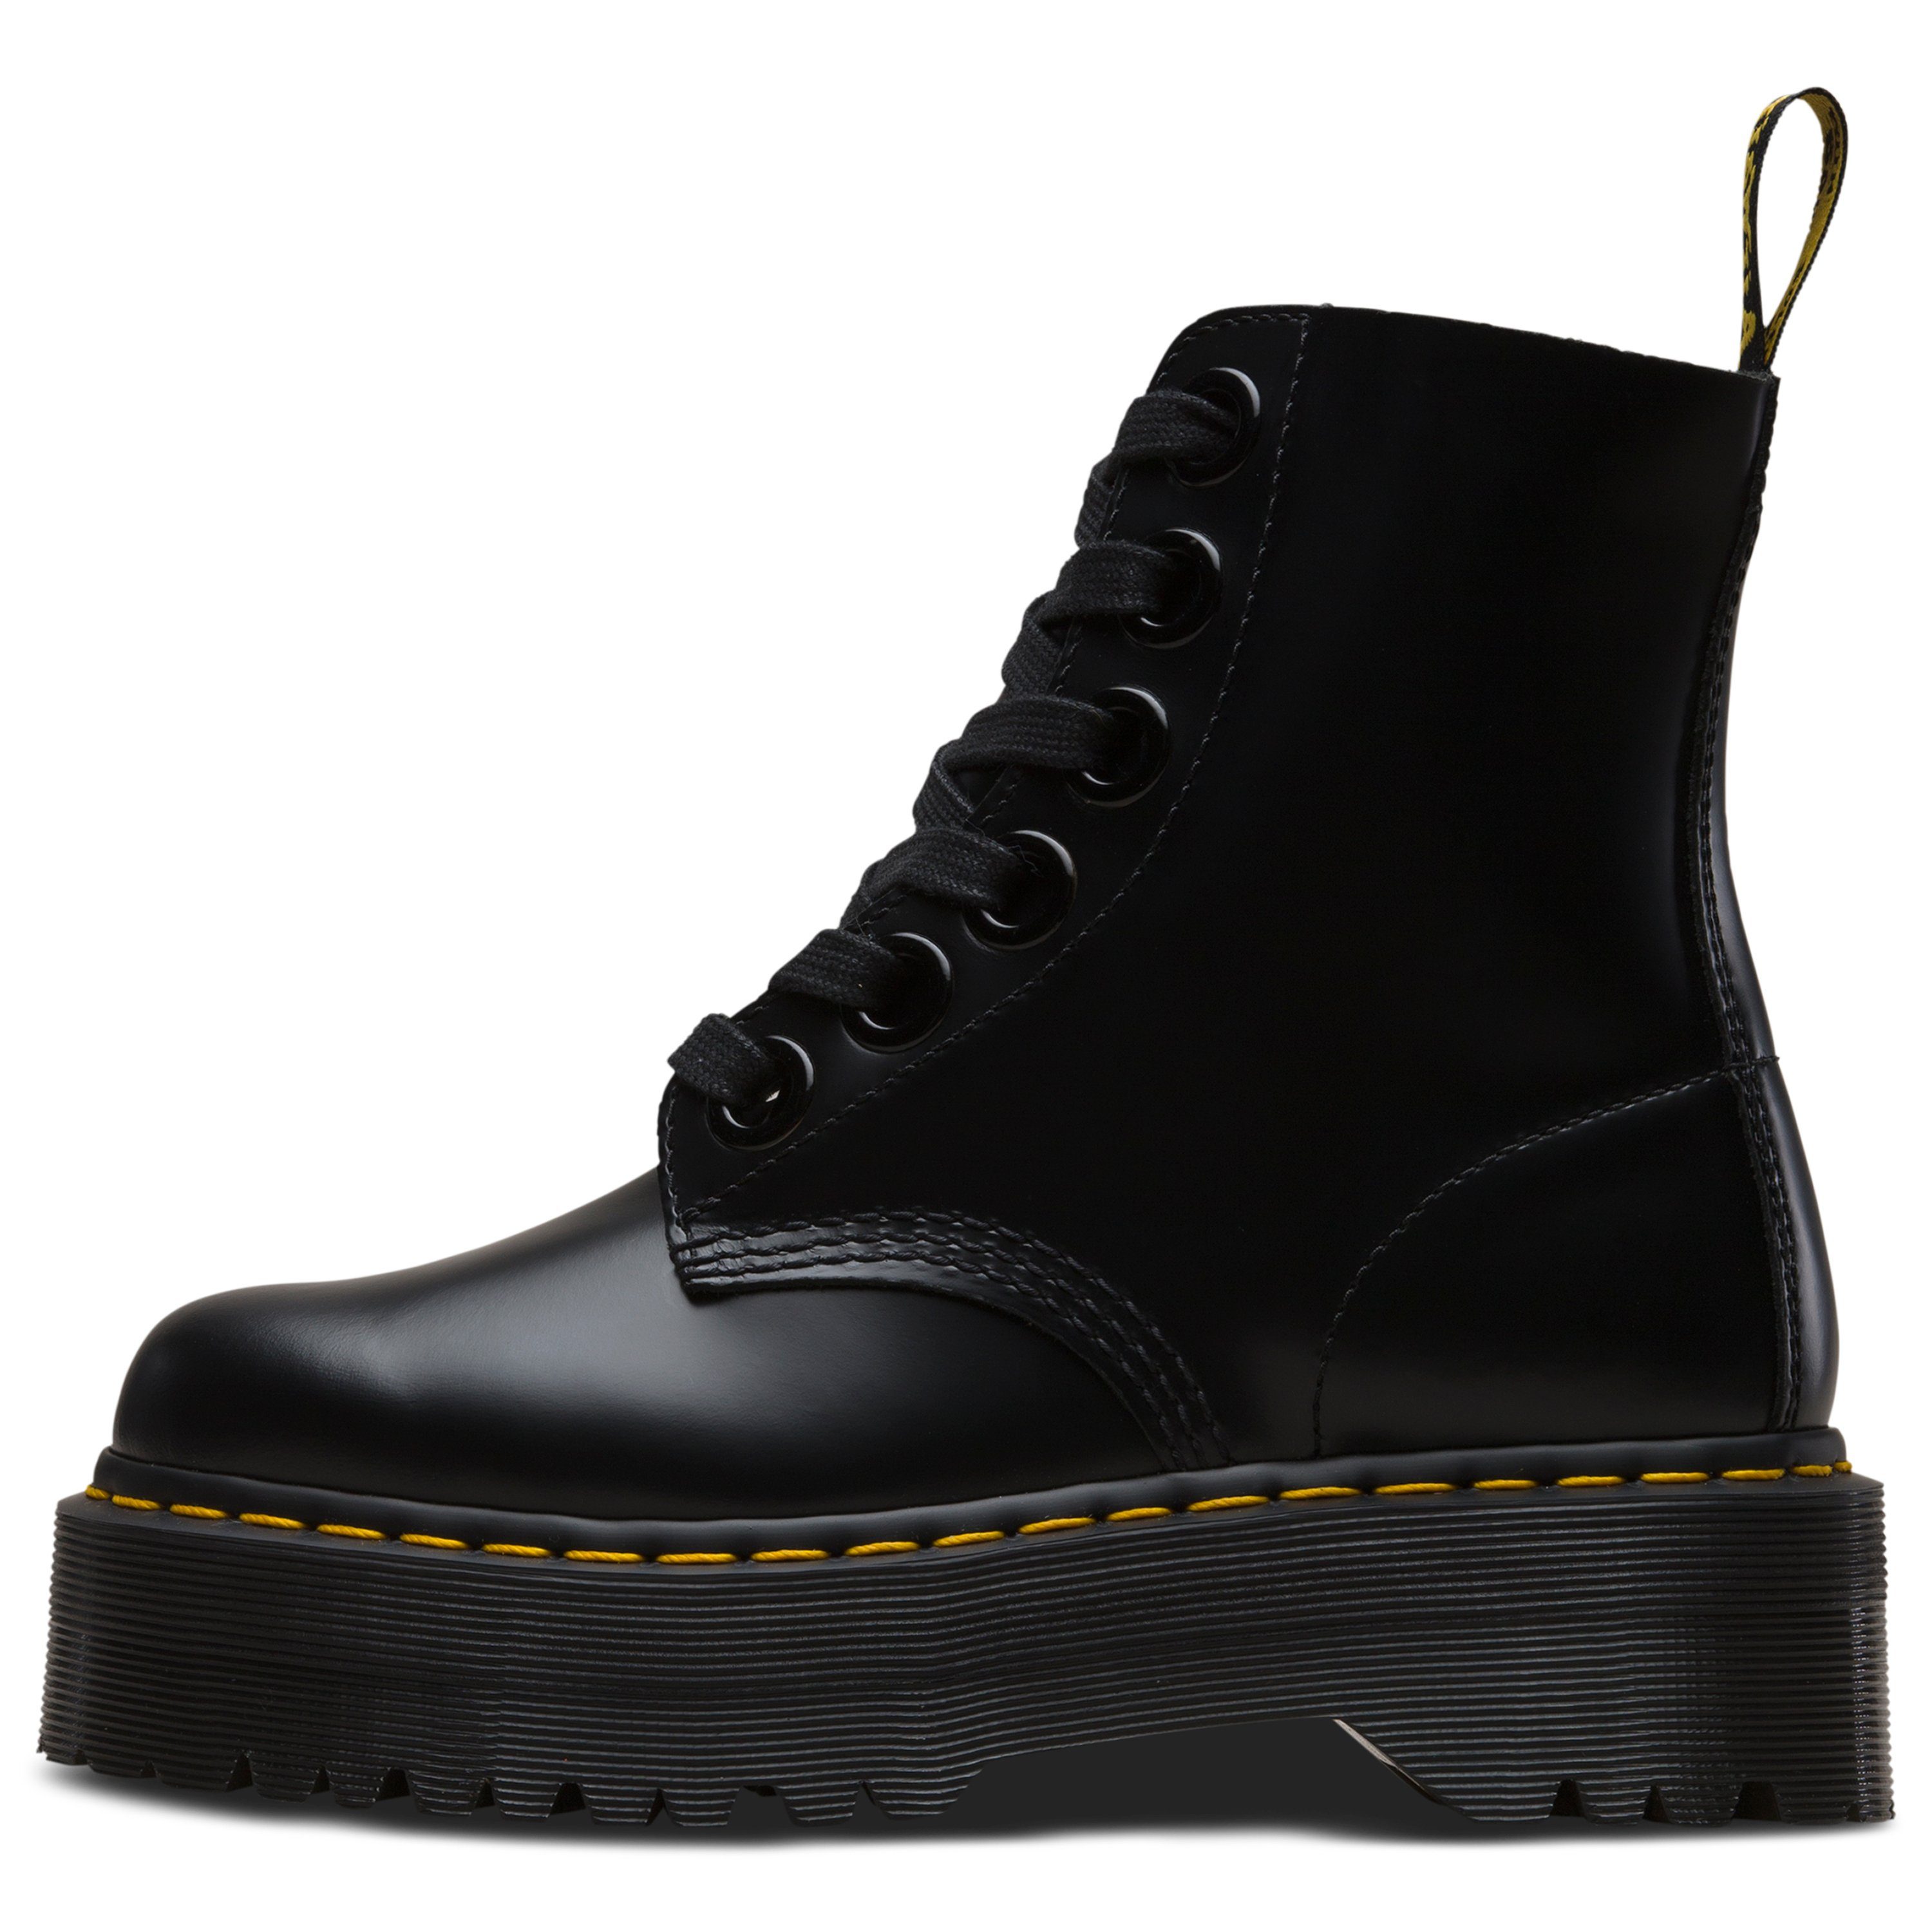 DR. MARTENS MOLLY Buttero Ankleboots (2-tlg)